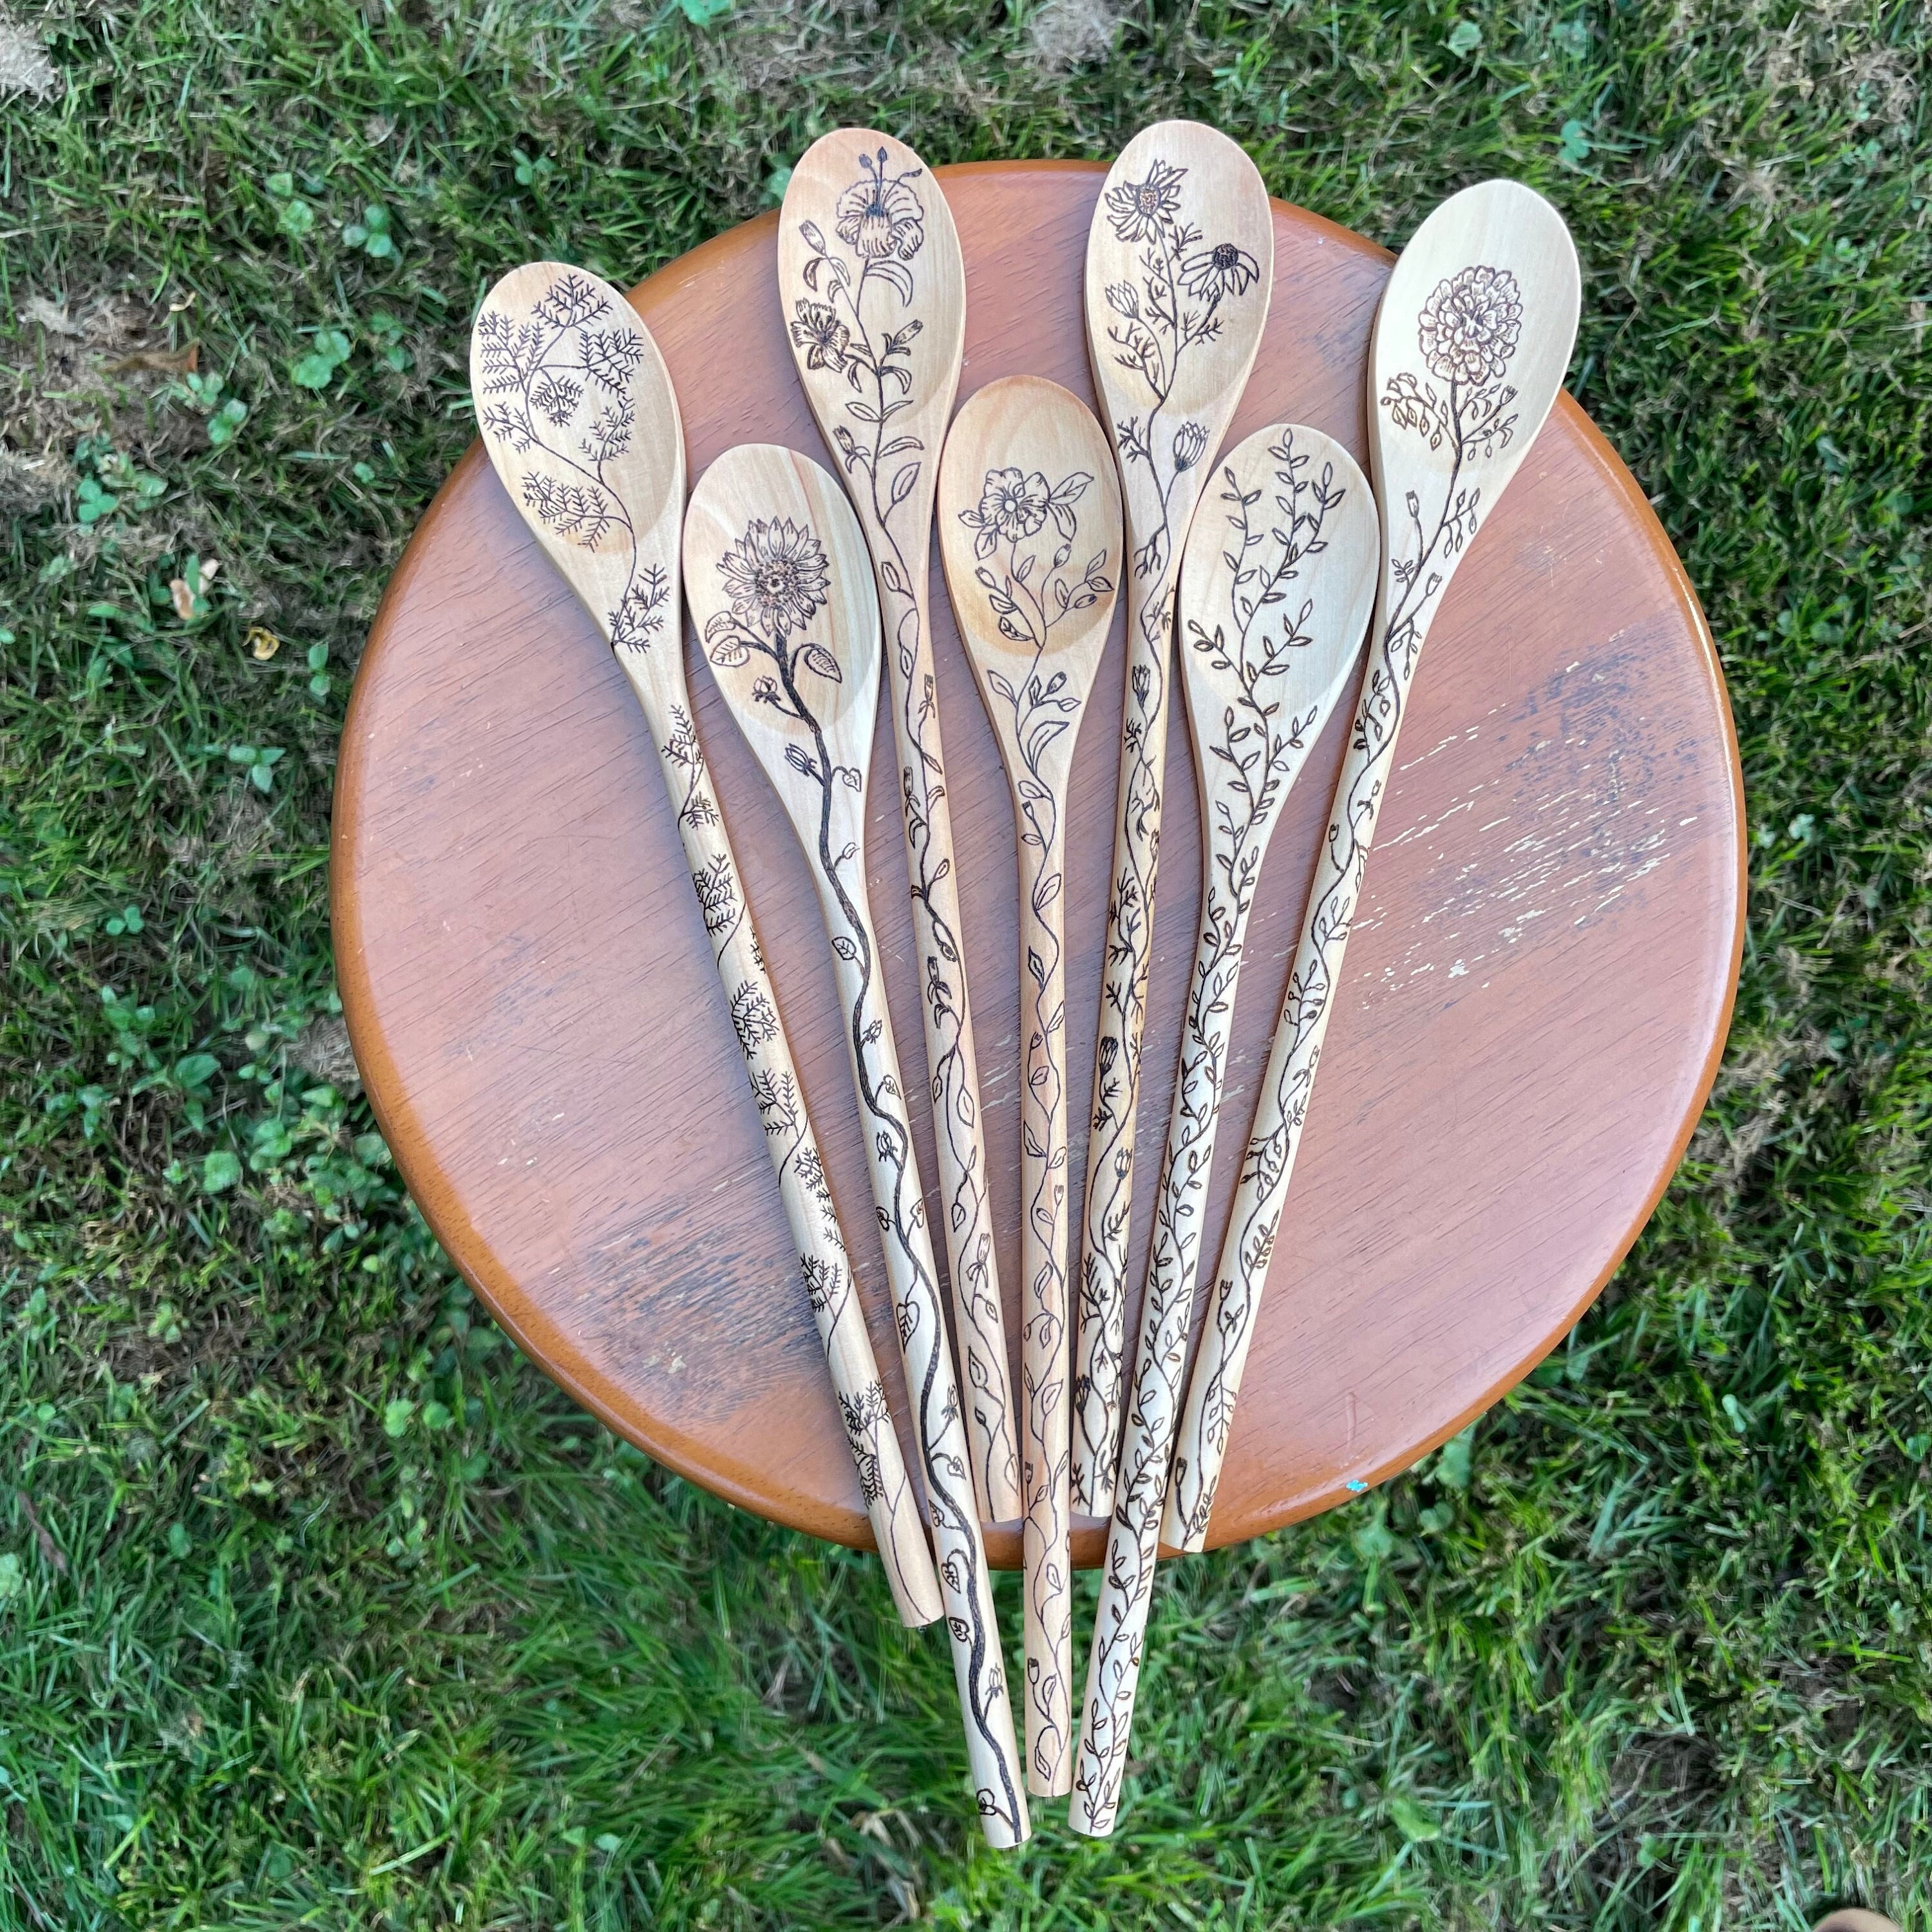 Wood Burned Wooden Spoon, Pyrography Art, Vines Spoon, Cooking